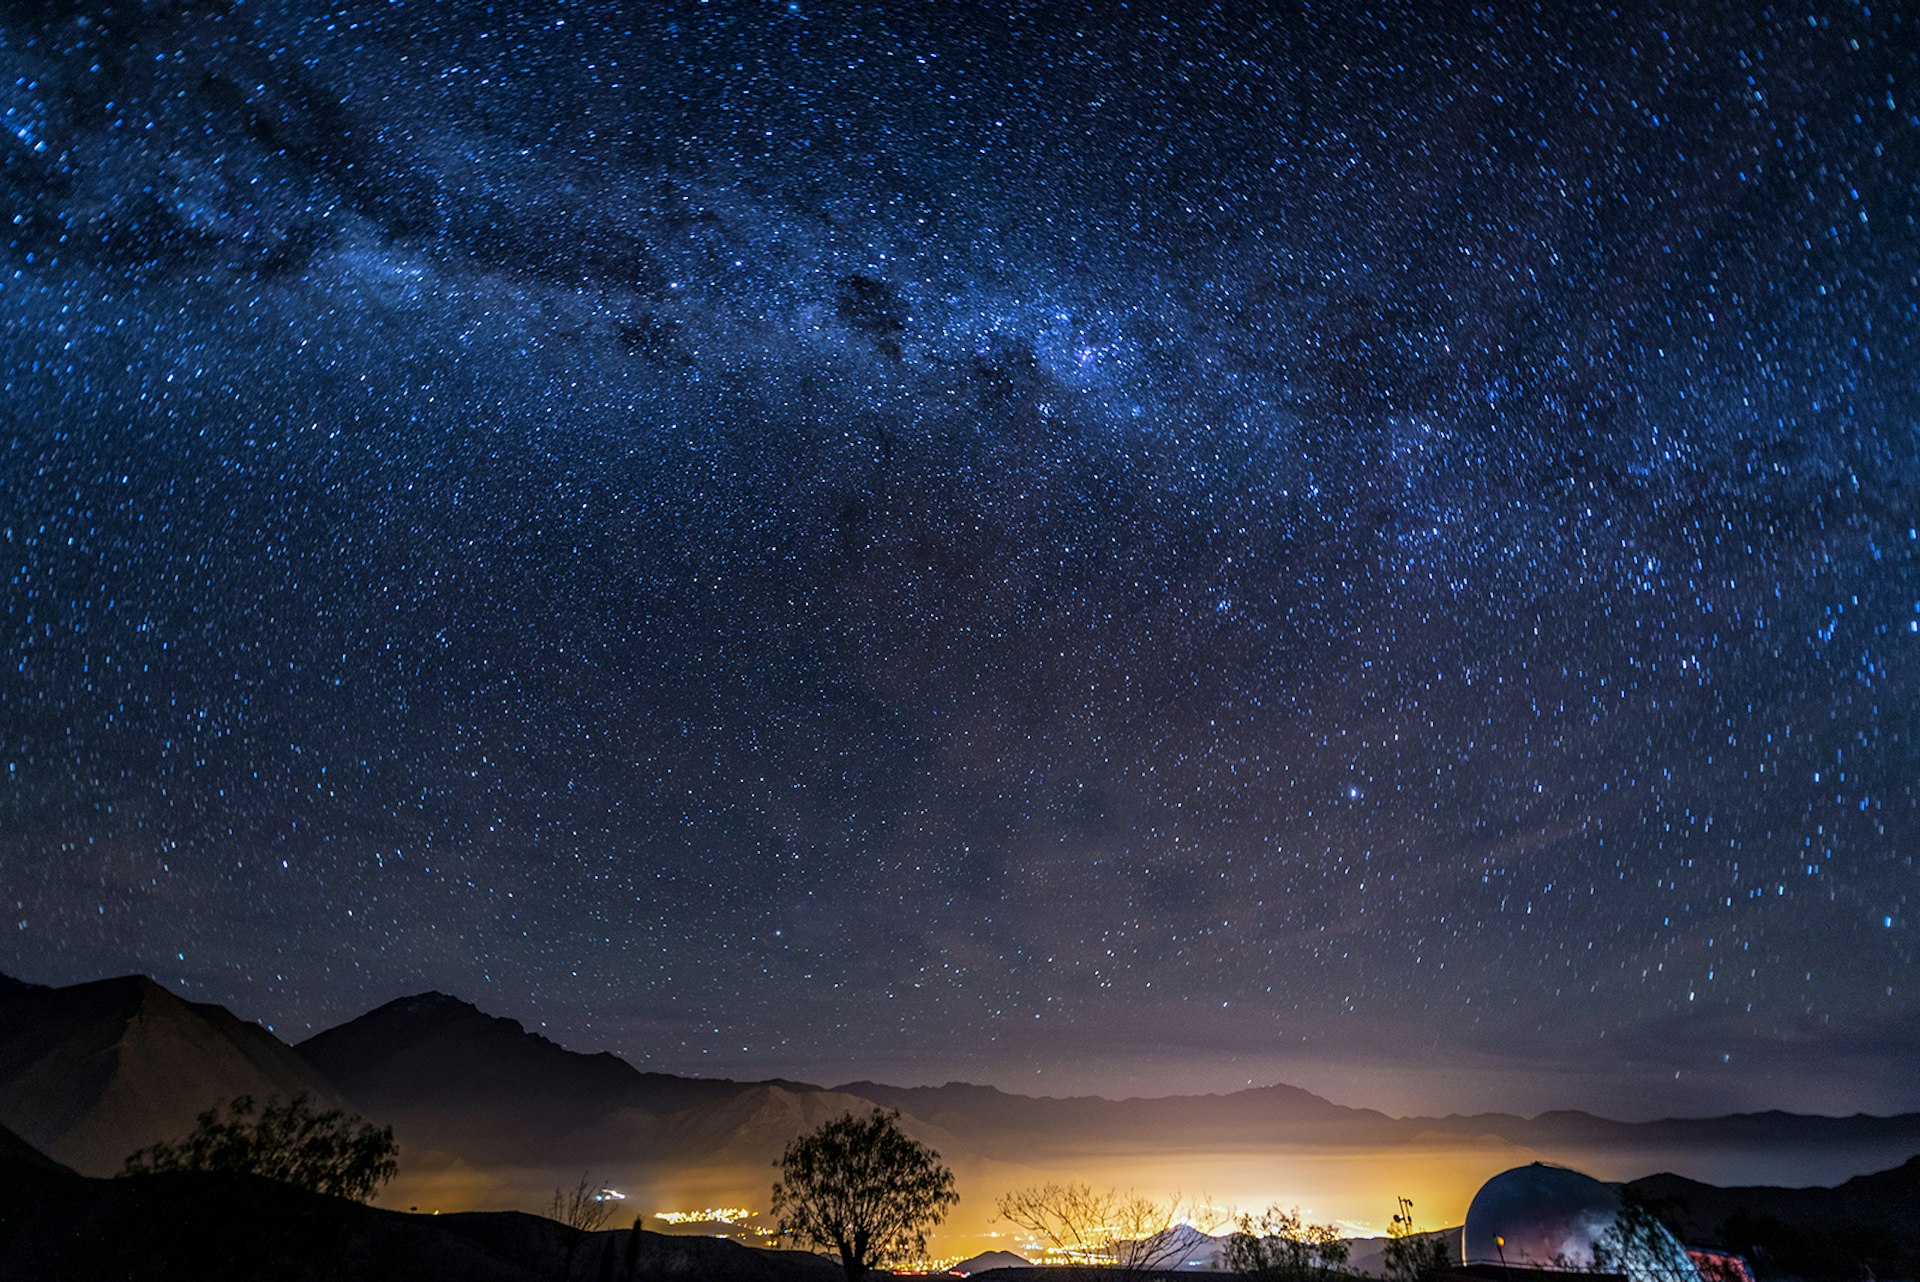 A long-exposure photo of the Milky Way over the lights of the Elqui Valley © Jesse Kraft / EyeEm / Getty Images